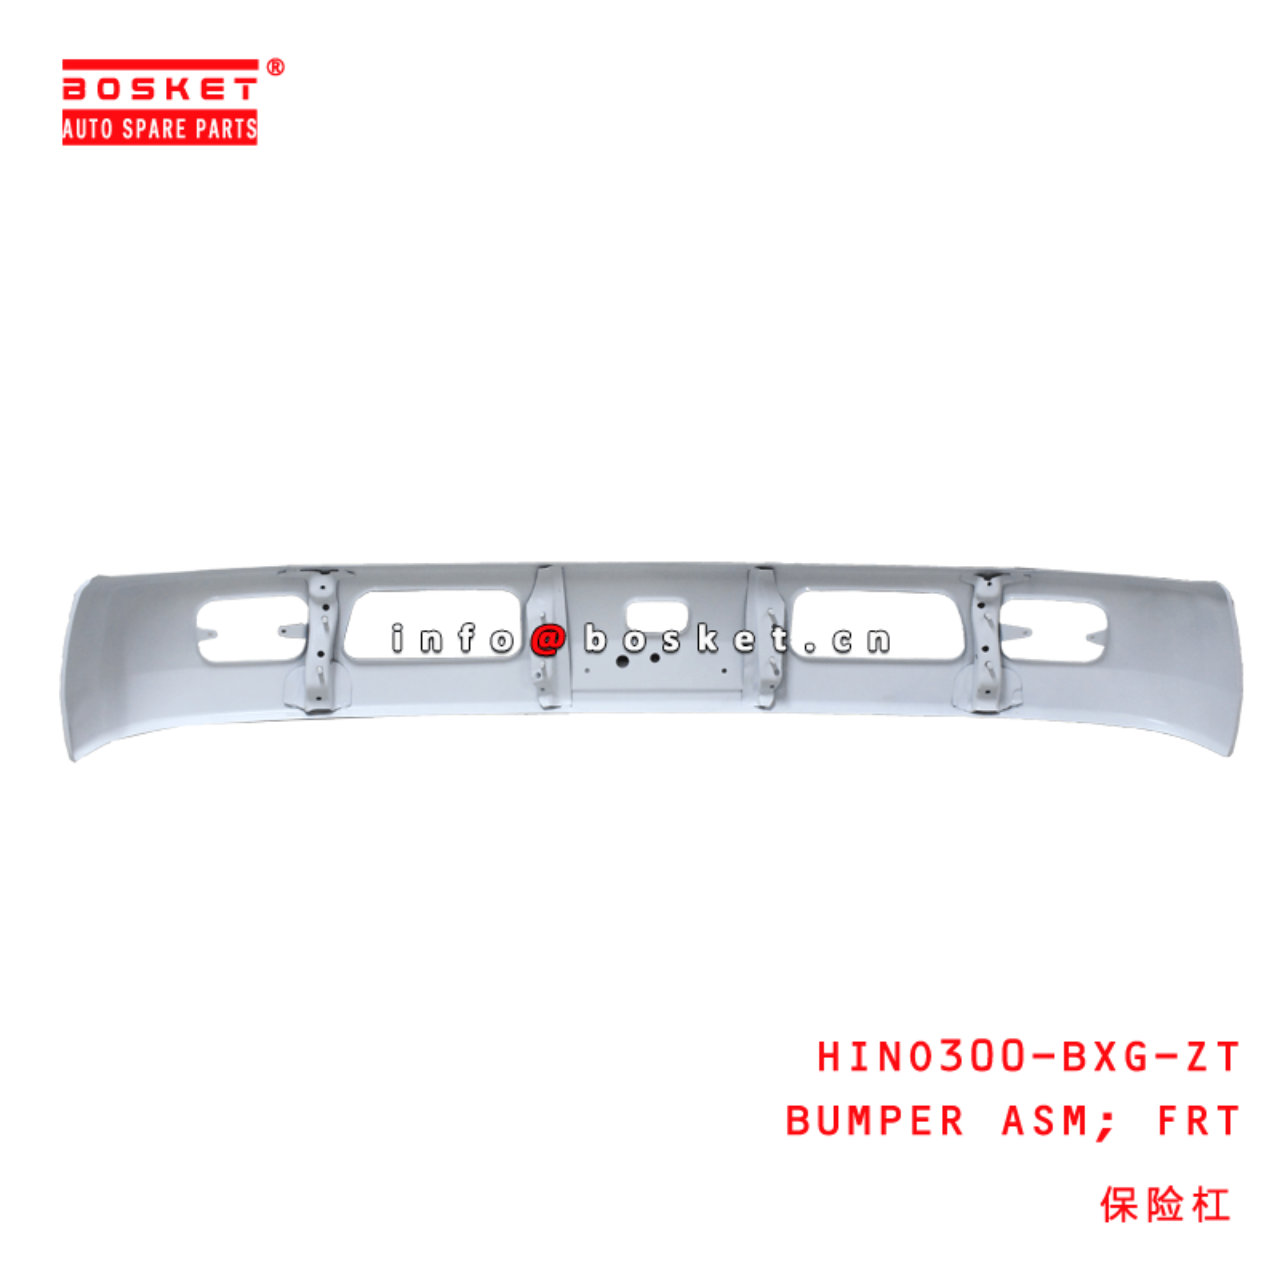 HINO300-BXG-ZT Front Bumper Assembly Suitable For HINO 300